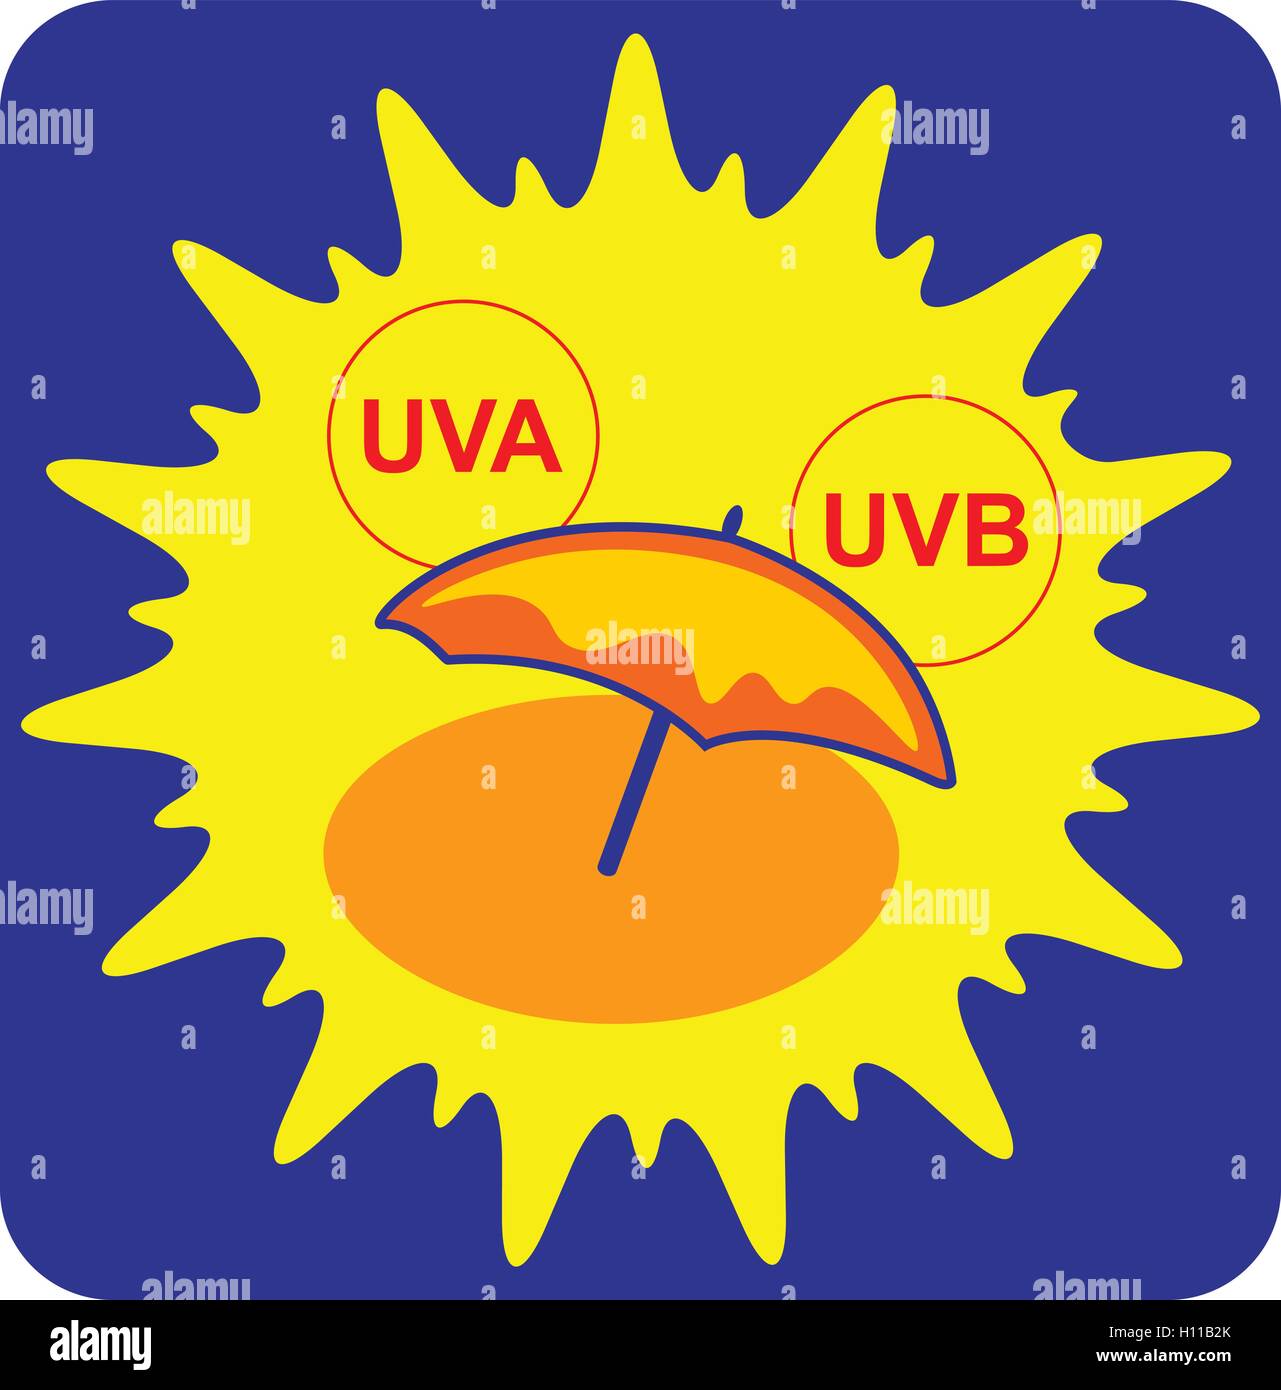 Uva uvb rays Stock Vector Images - Alamy